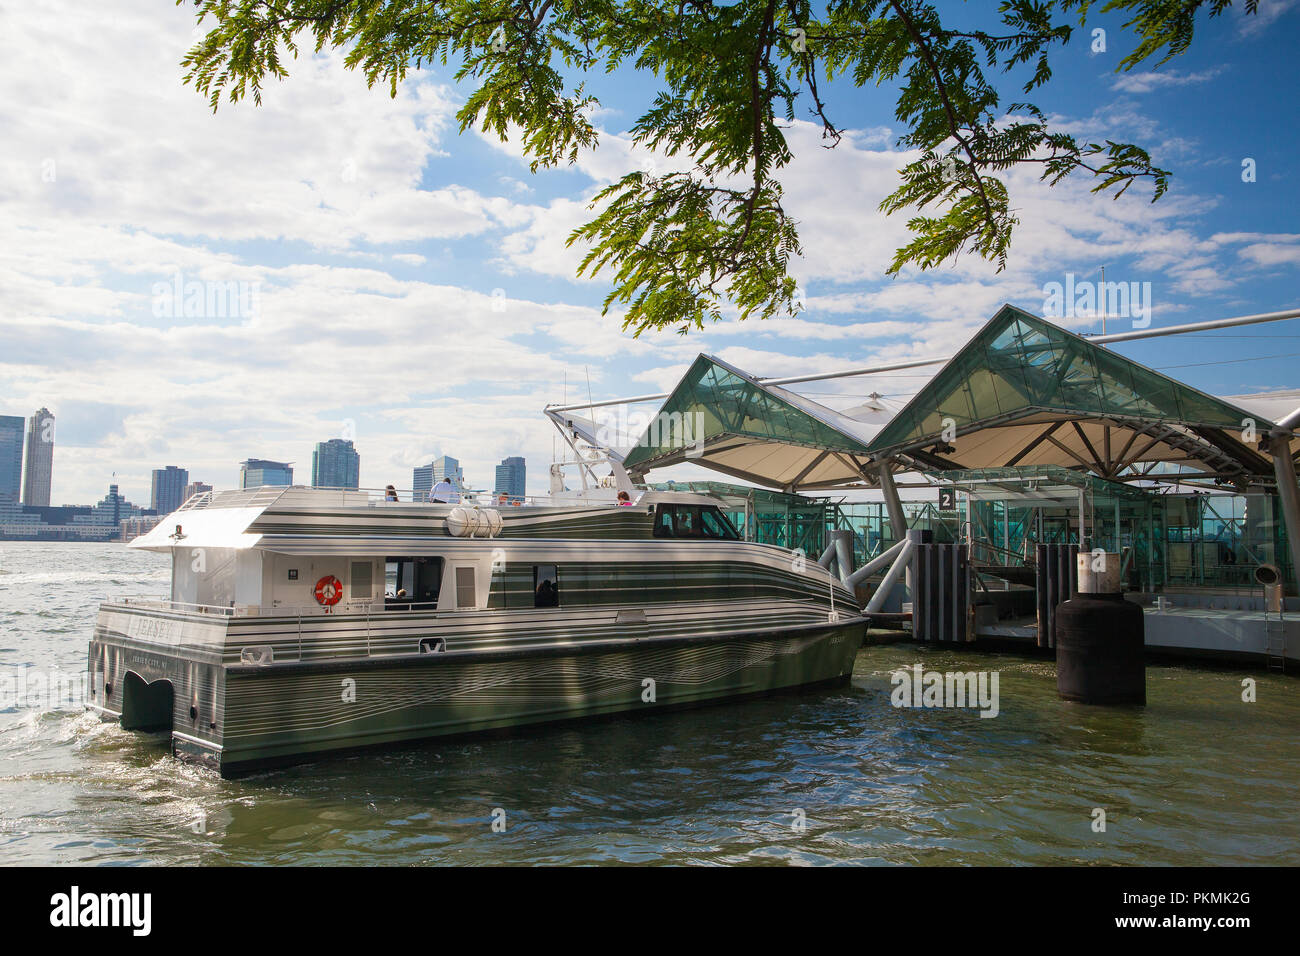 New York, USA - July 30, 2013: In the public harbor,  Battery Park, New York. Battery Park is a 25 acre public park located at the Battery, the southe Stock Photo